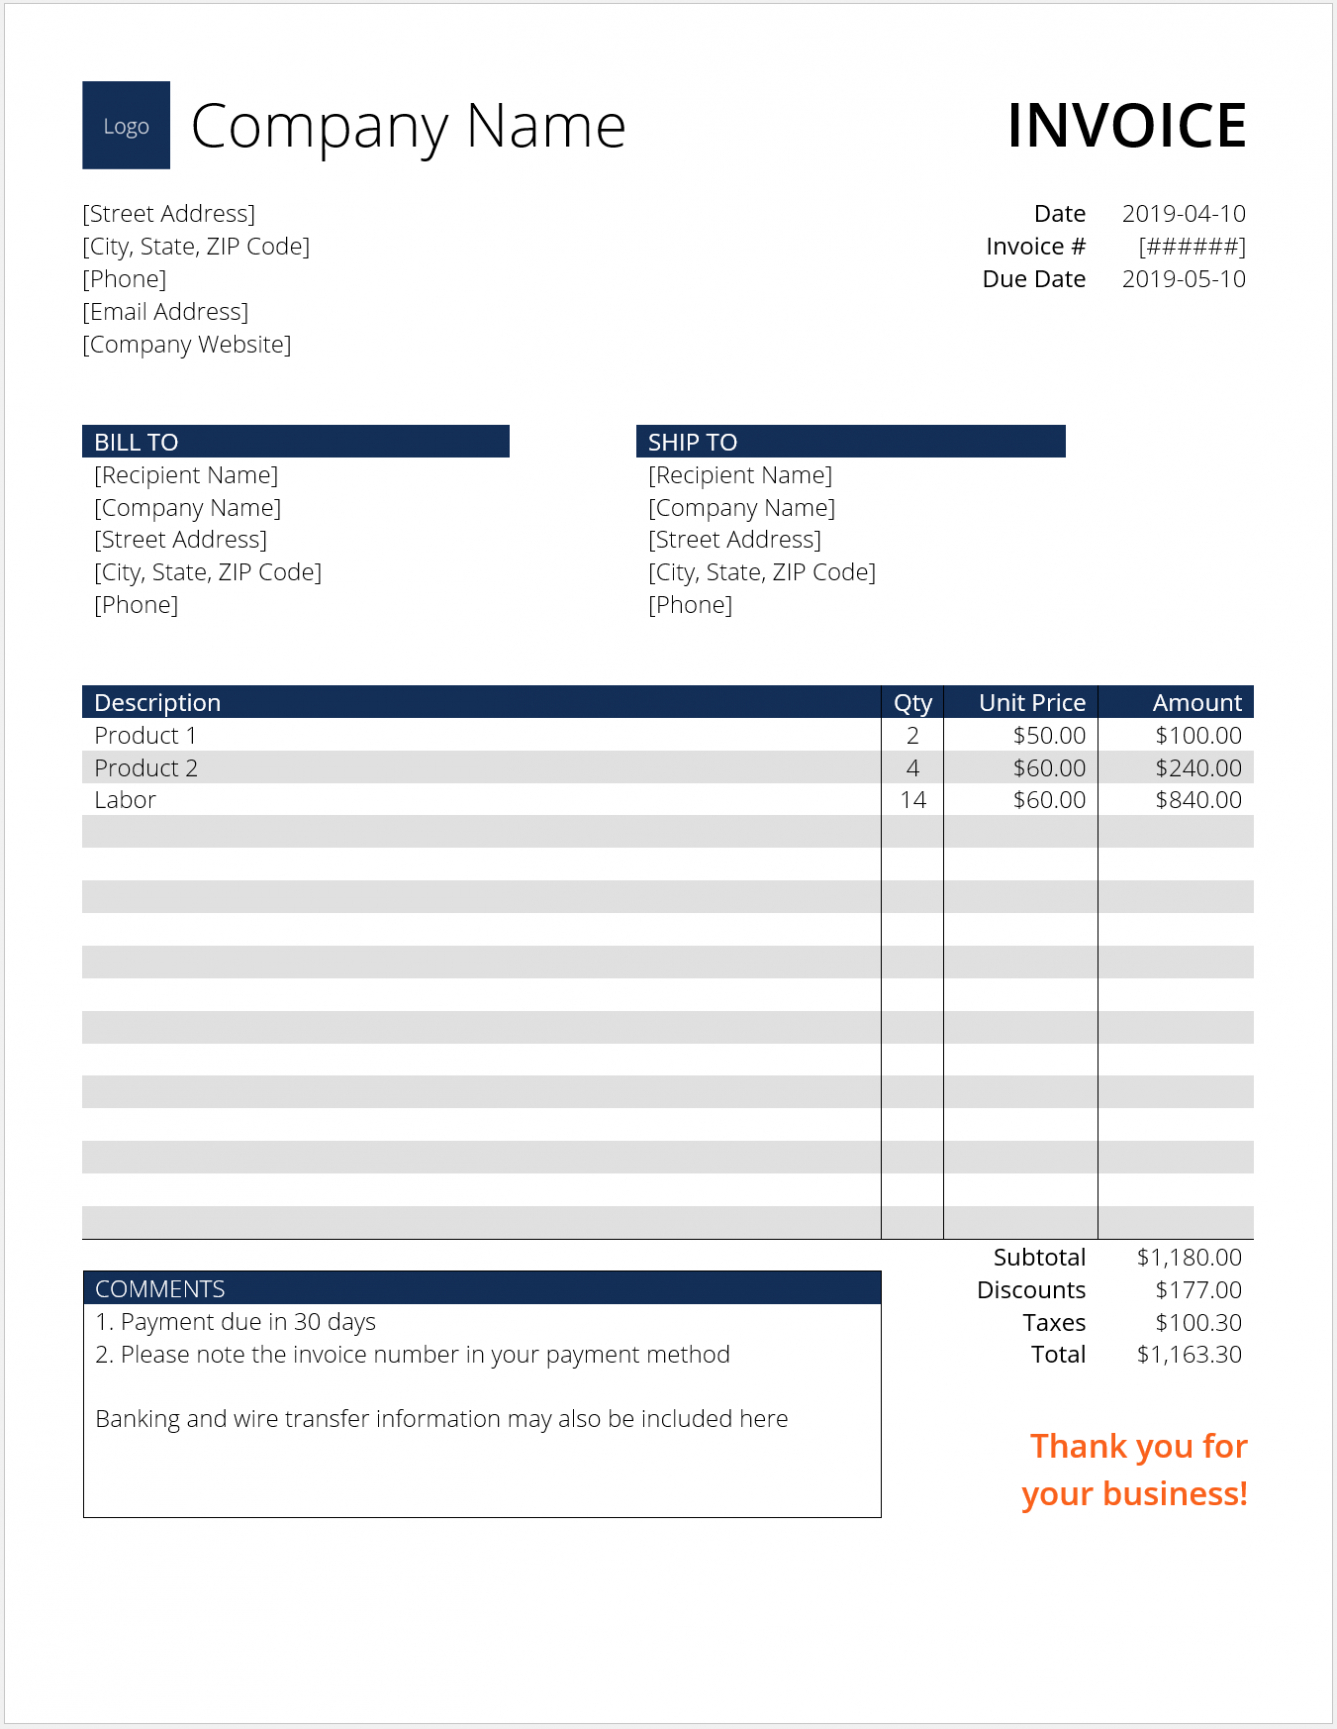 Invoice Template (Word) - Download Free Word Template inside Sample Invoice Template Word